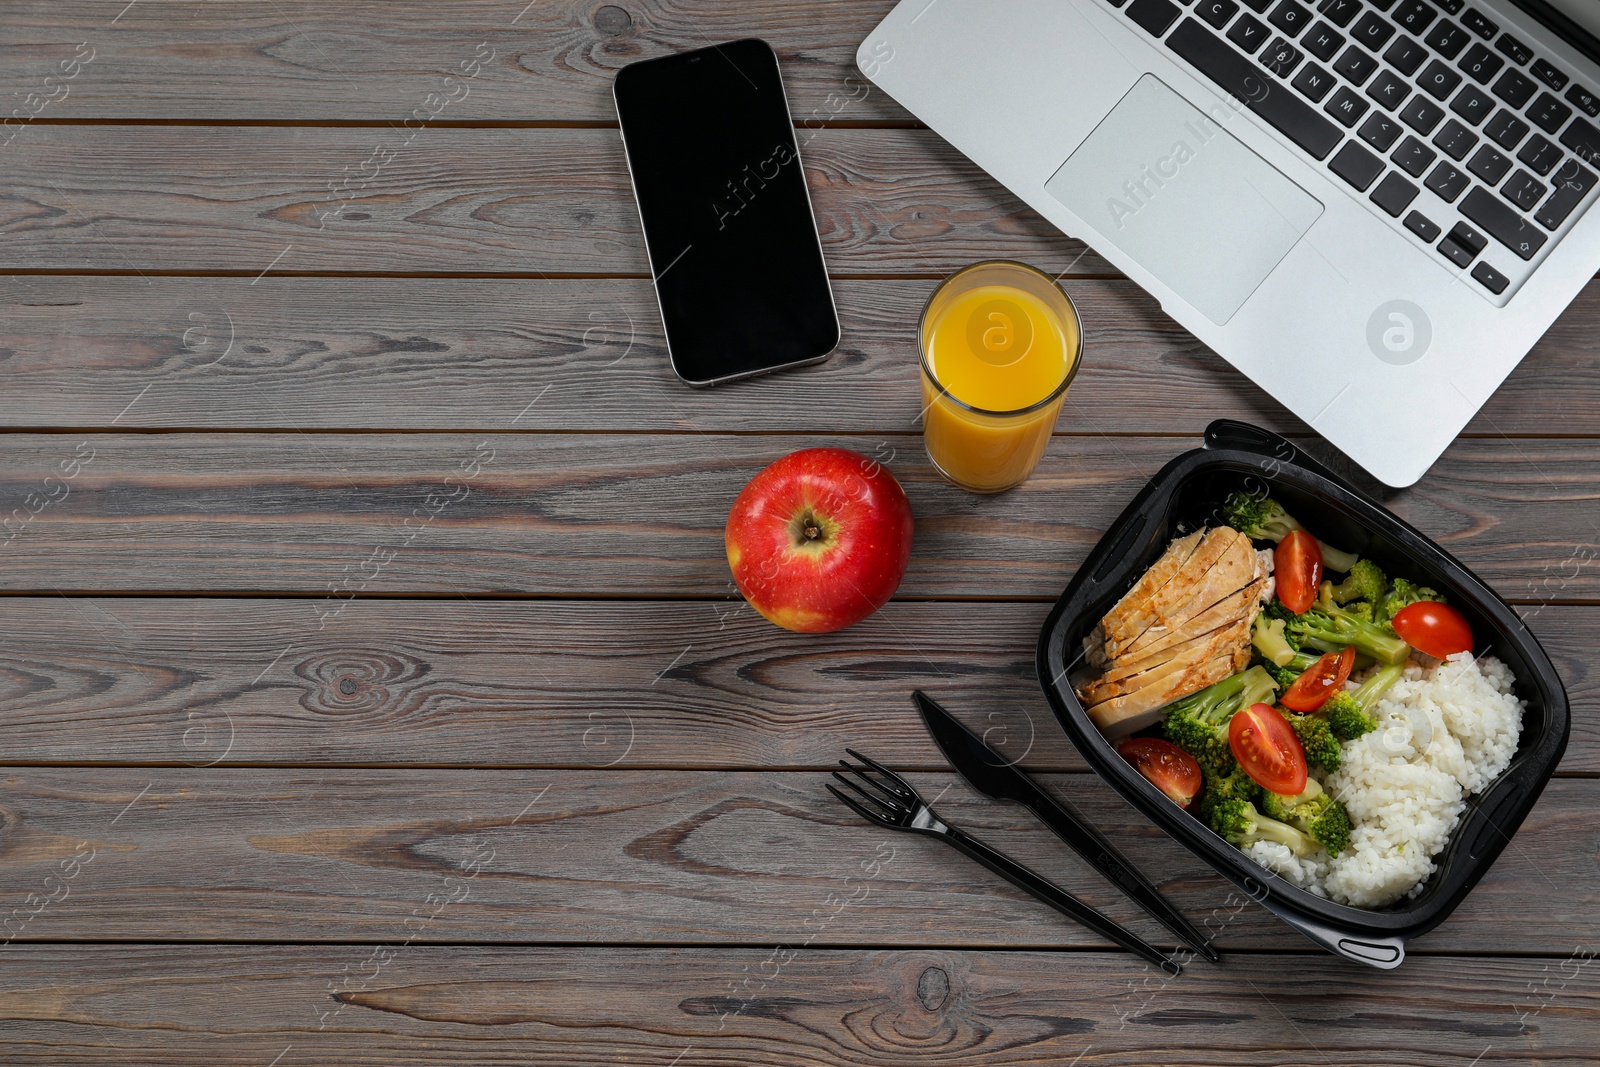 Photo of Container of tasty food, glass of juice, laptop, apple and smartphone on wooden table, flat lay with space for text. Business lunch